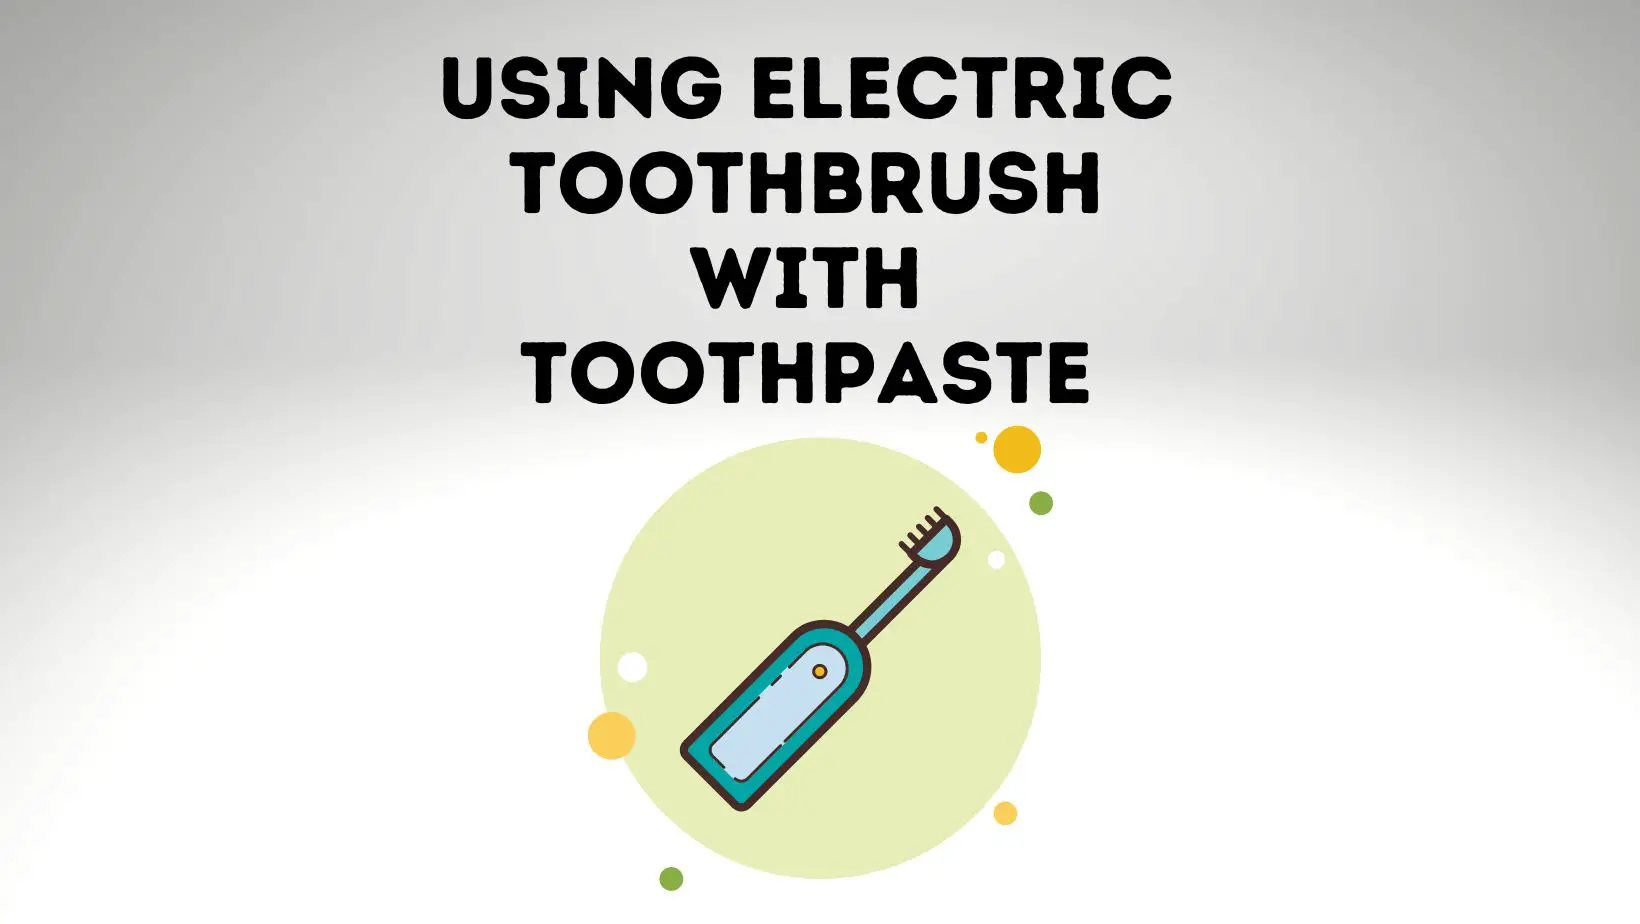 How To Use Electric Toothbrush With Toothpaste